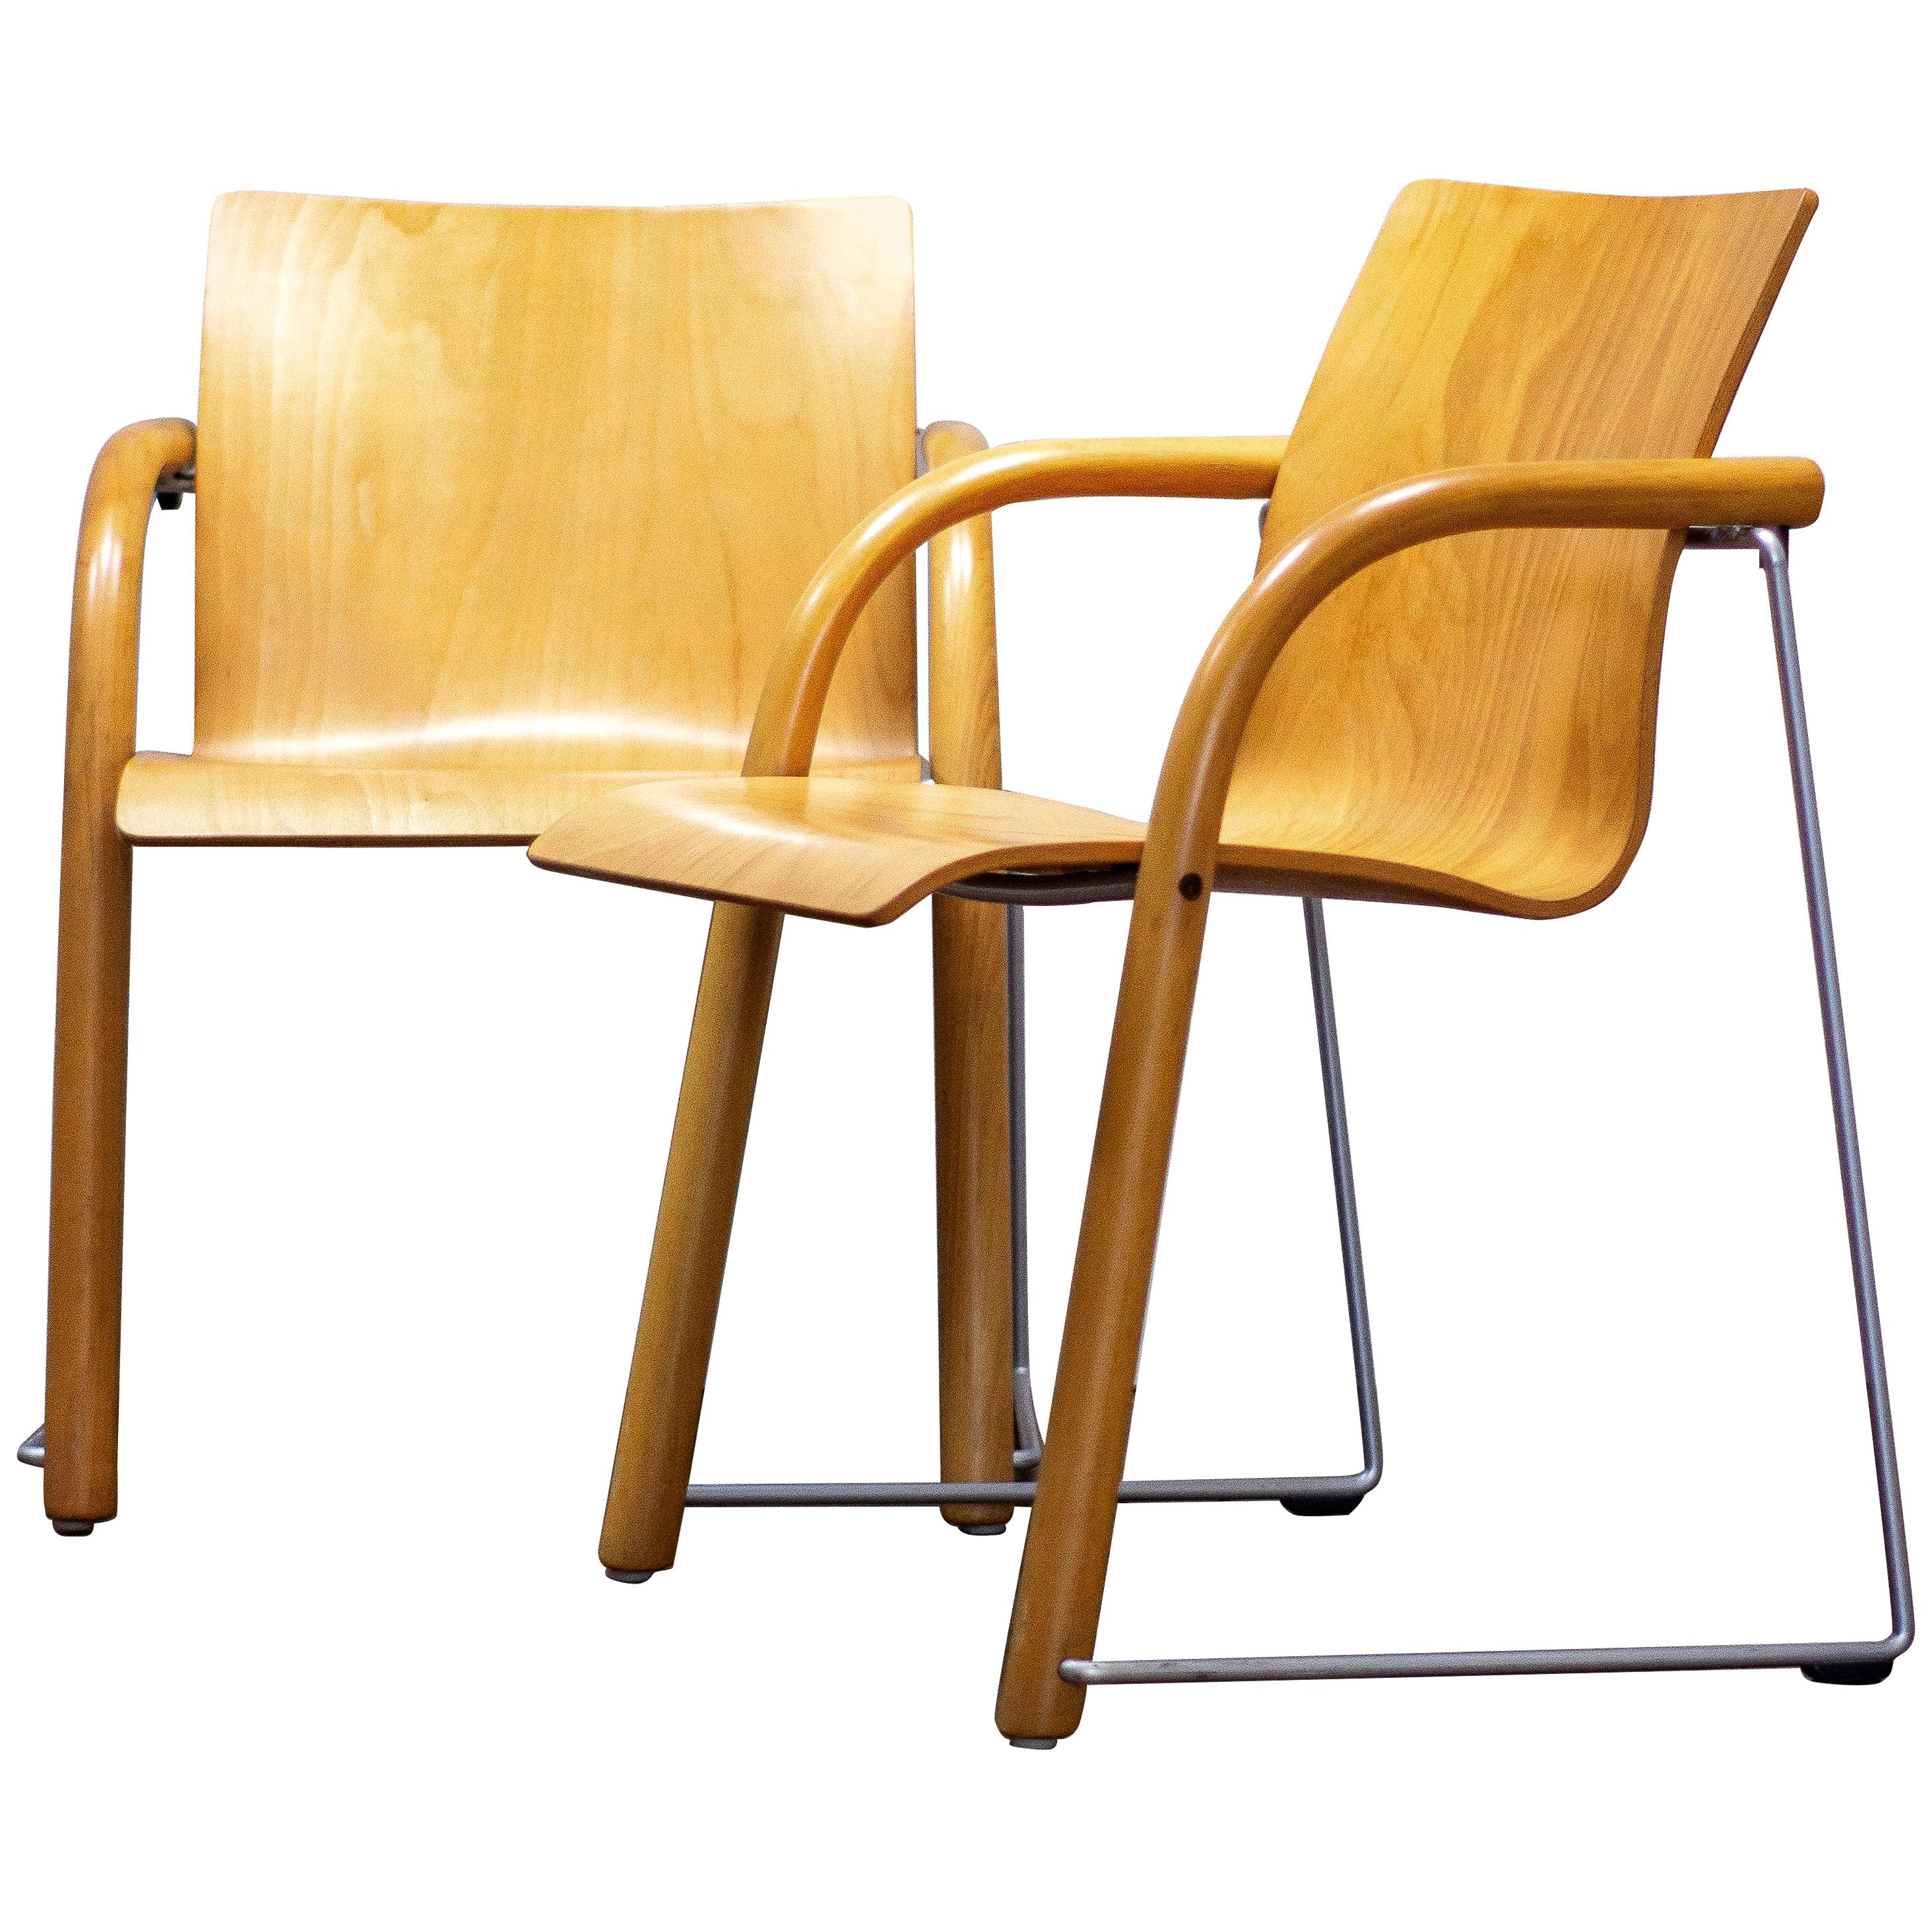 Pair of Armchairs by Ulrich Bohme/ Wulf Schneider for Thonet